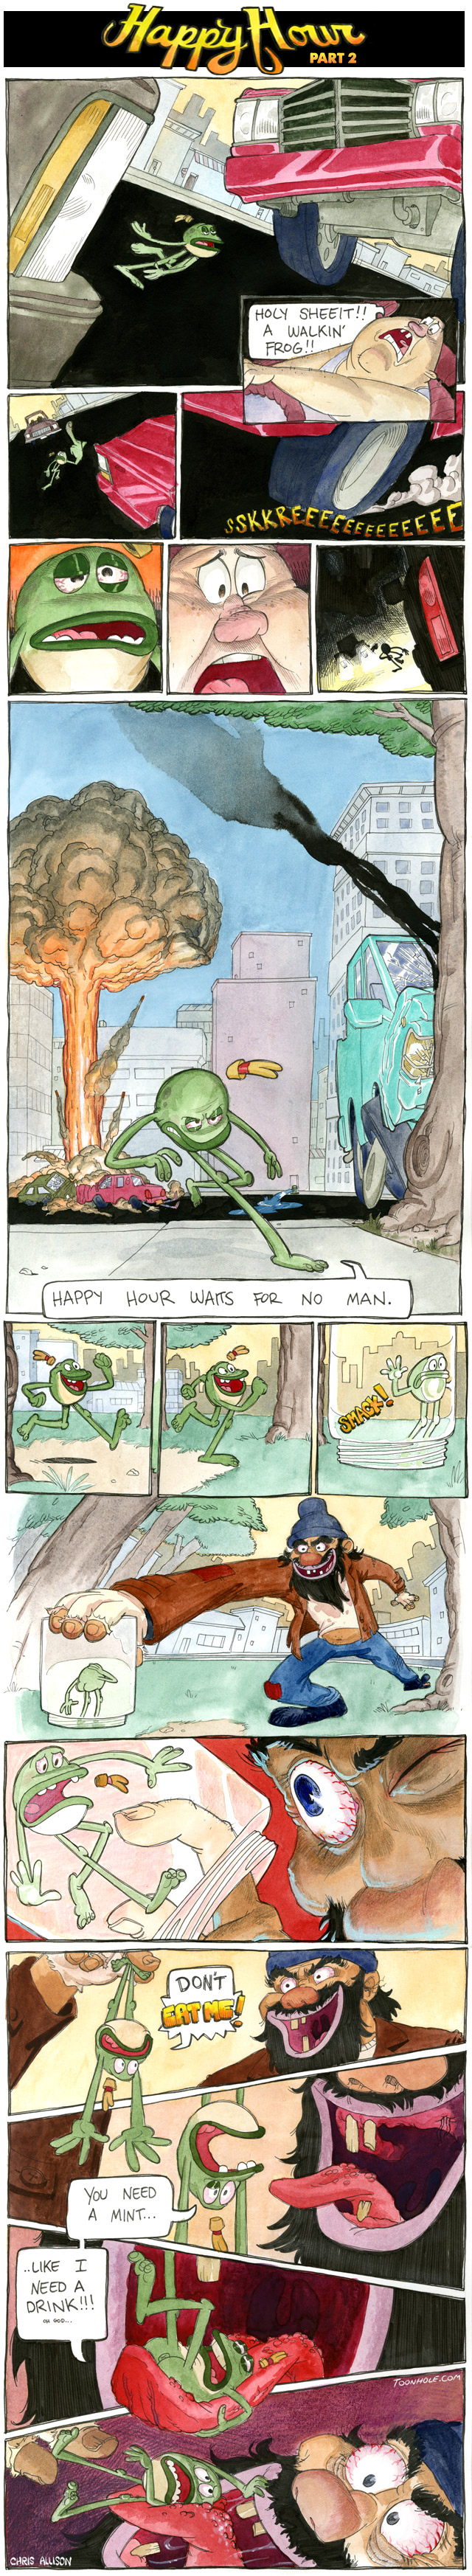 Lou the Drunk Frog crosses the street and then is on his way to the bar when...  Updated every Tuesday and Thursday on Toonhole.com, but I'll try to make sure to get it up on ebaums for you folks. : 